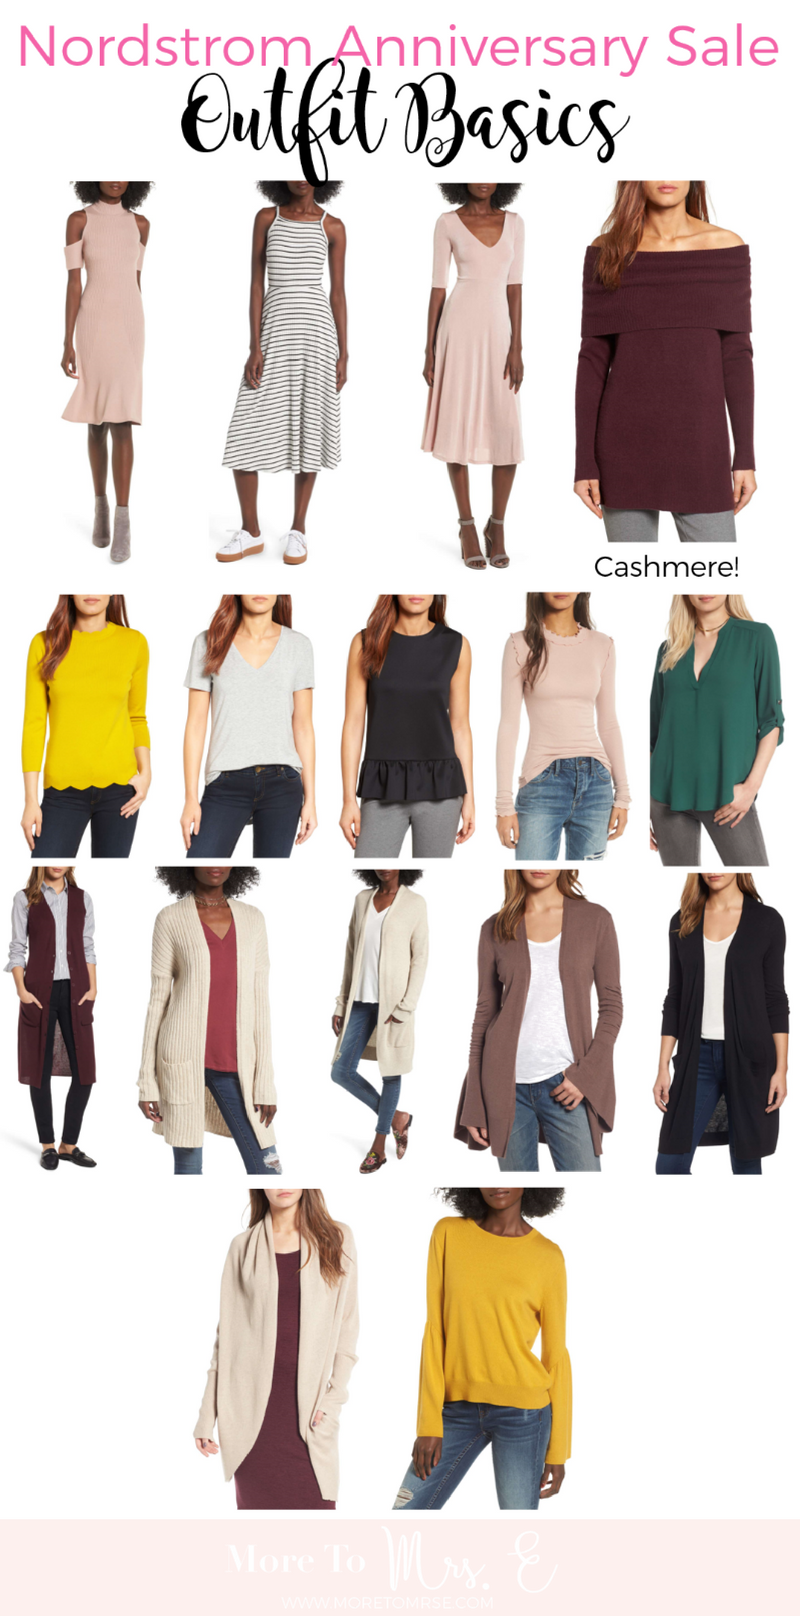 Nordstrom Anniversary Sale Deals_outfit basics_tshirt_cardigan_top_dresses_casual